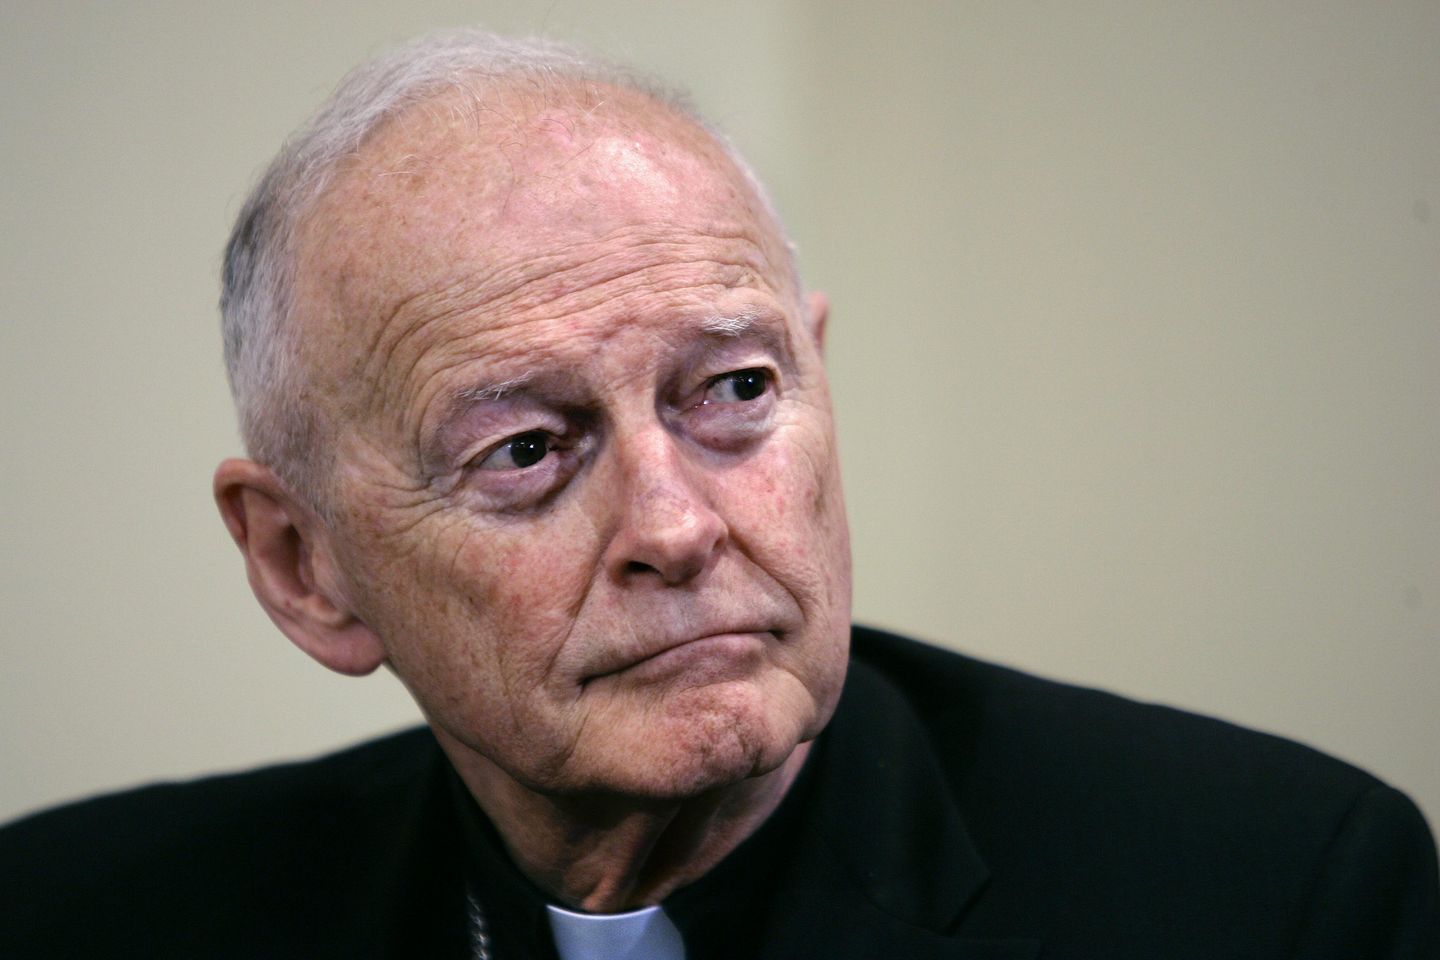 Ex-Cardinal McCarrick charged in Wisconsin with sex abuse